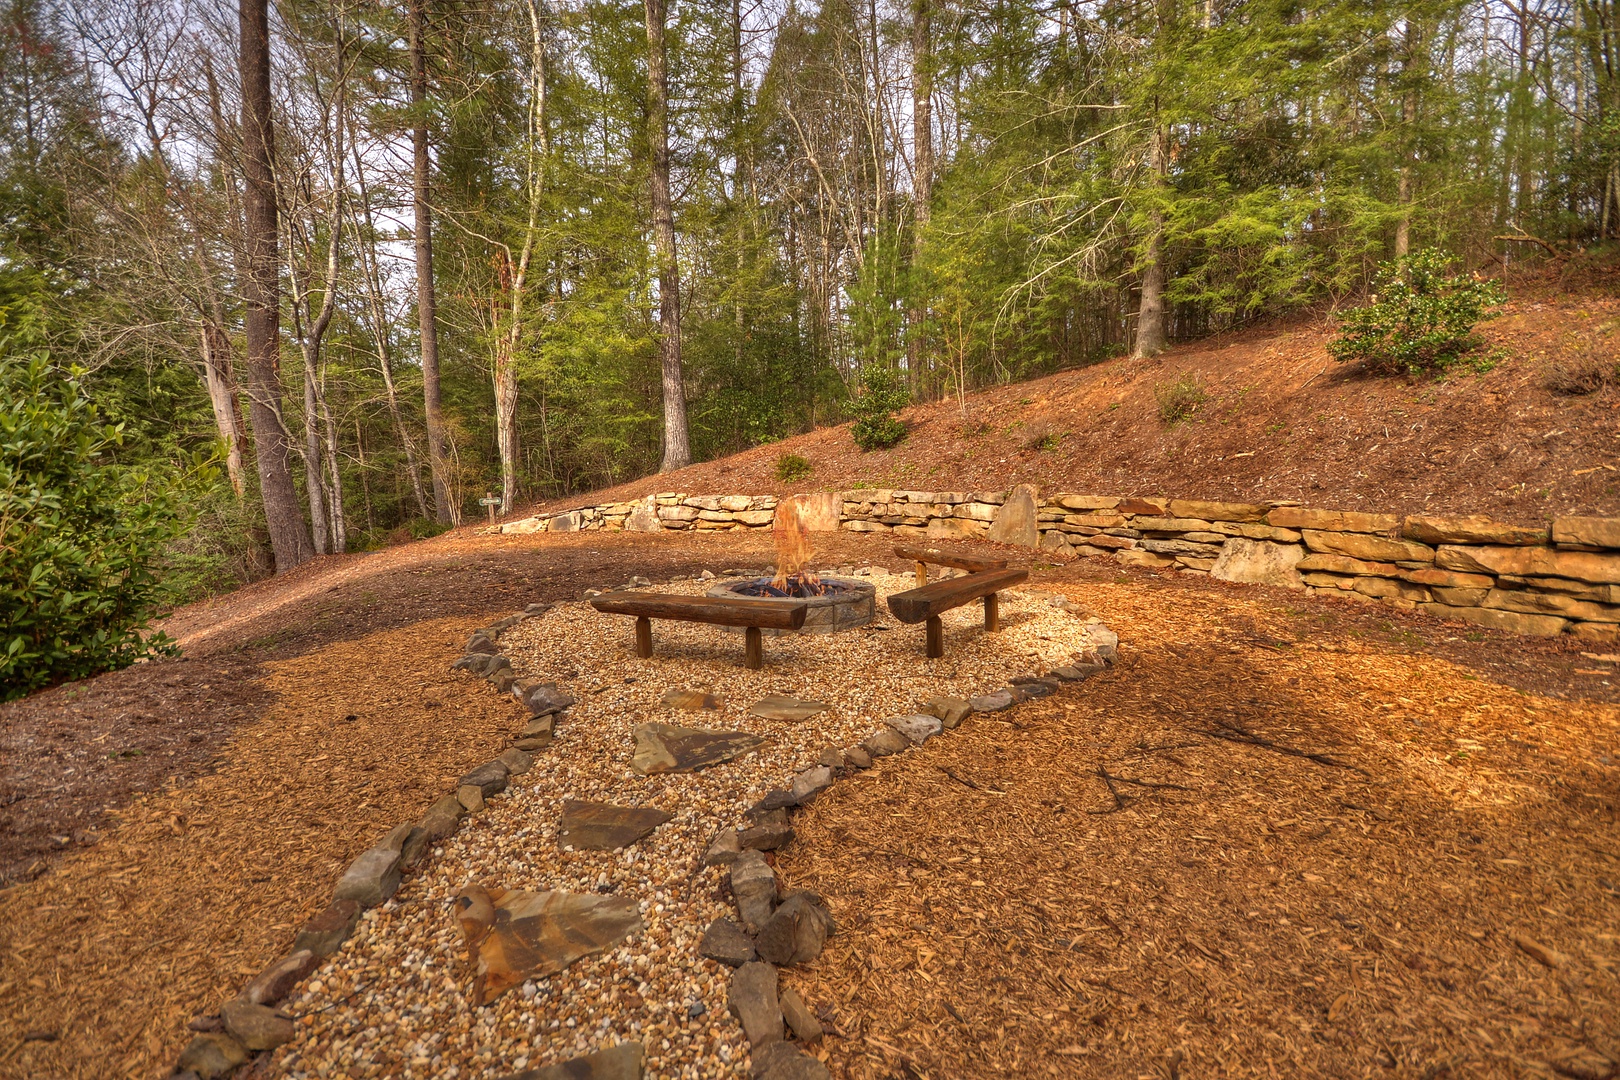 Reel Creek Lodge- Firepit area with stone walkway from the cabin